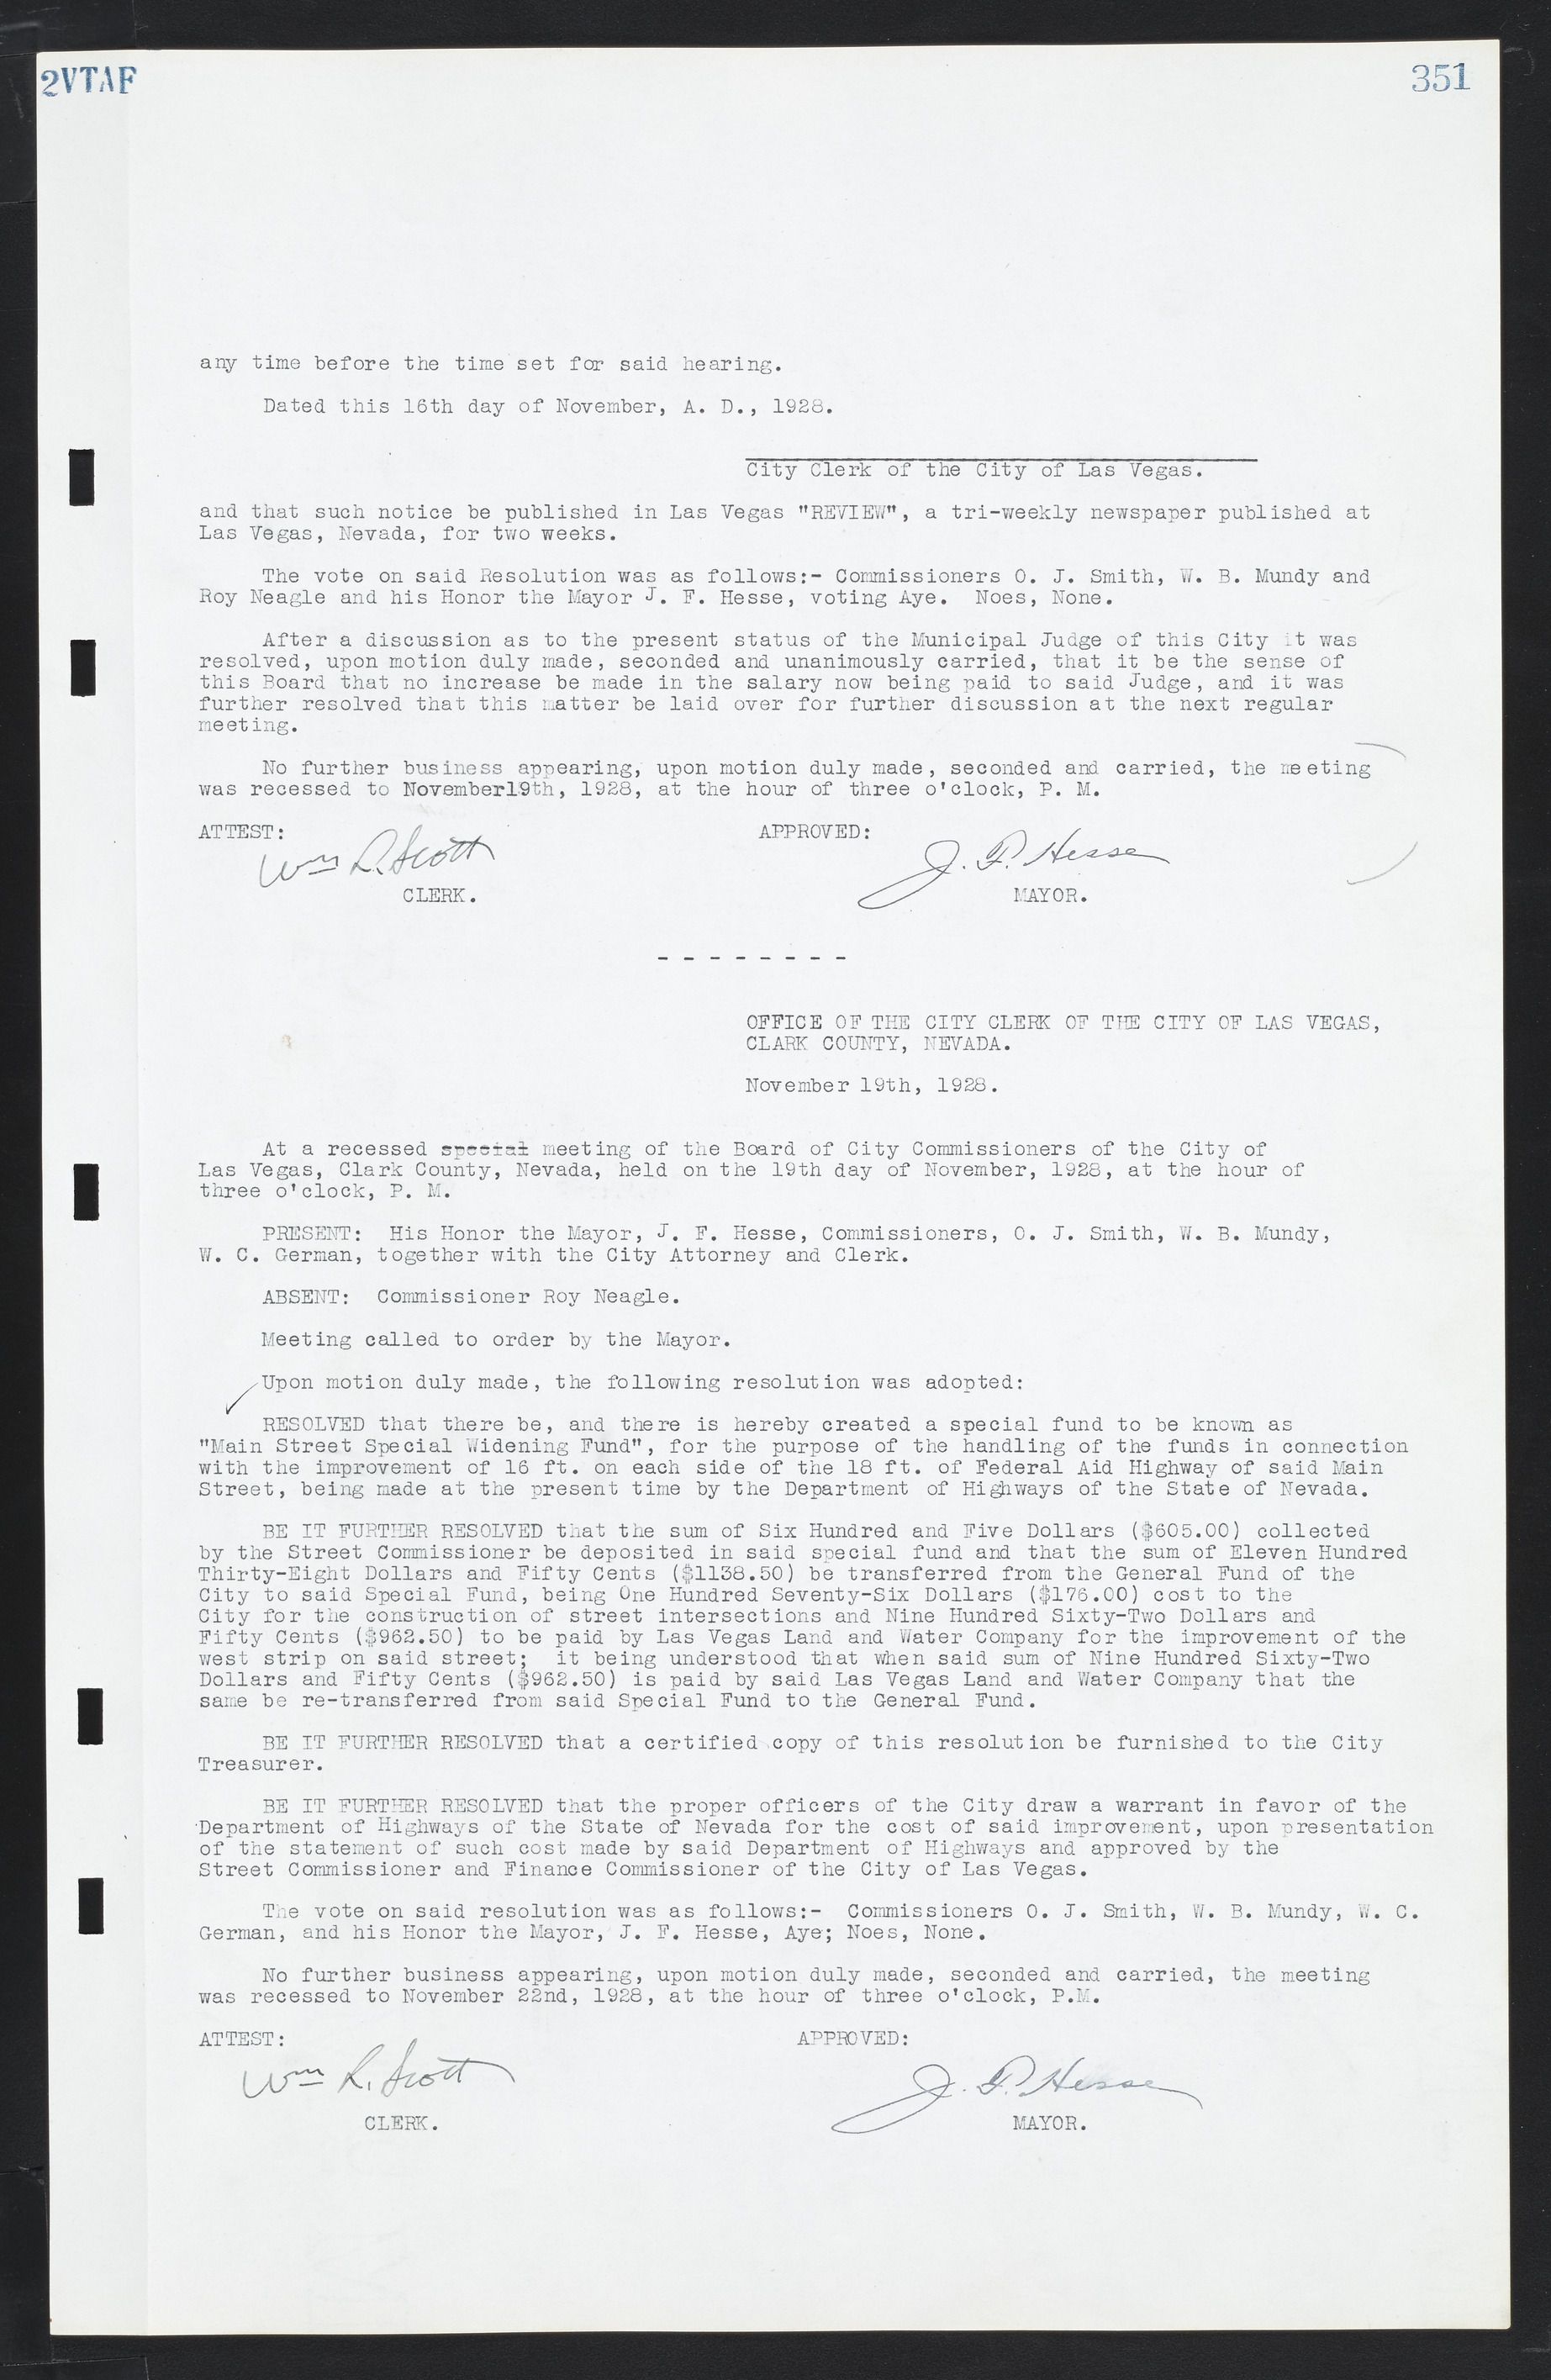 Las Vegas City Commission Minutes, March 1, 1922 to May 10, 1929, lvc000002-360